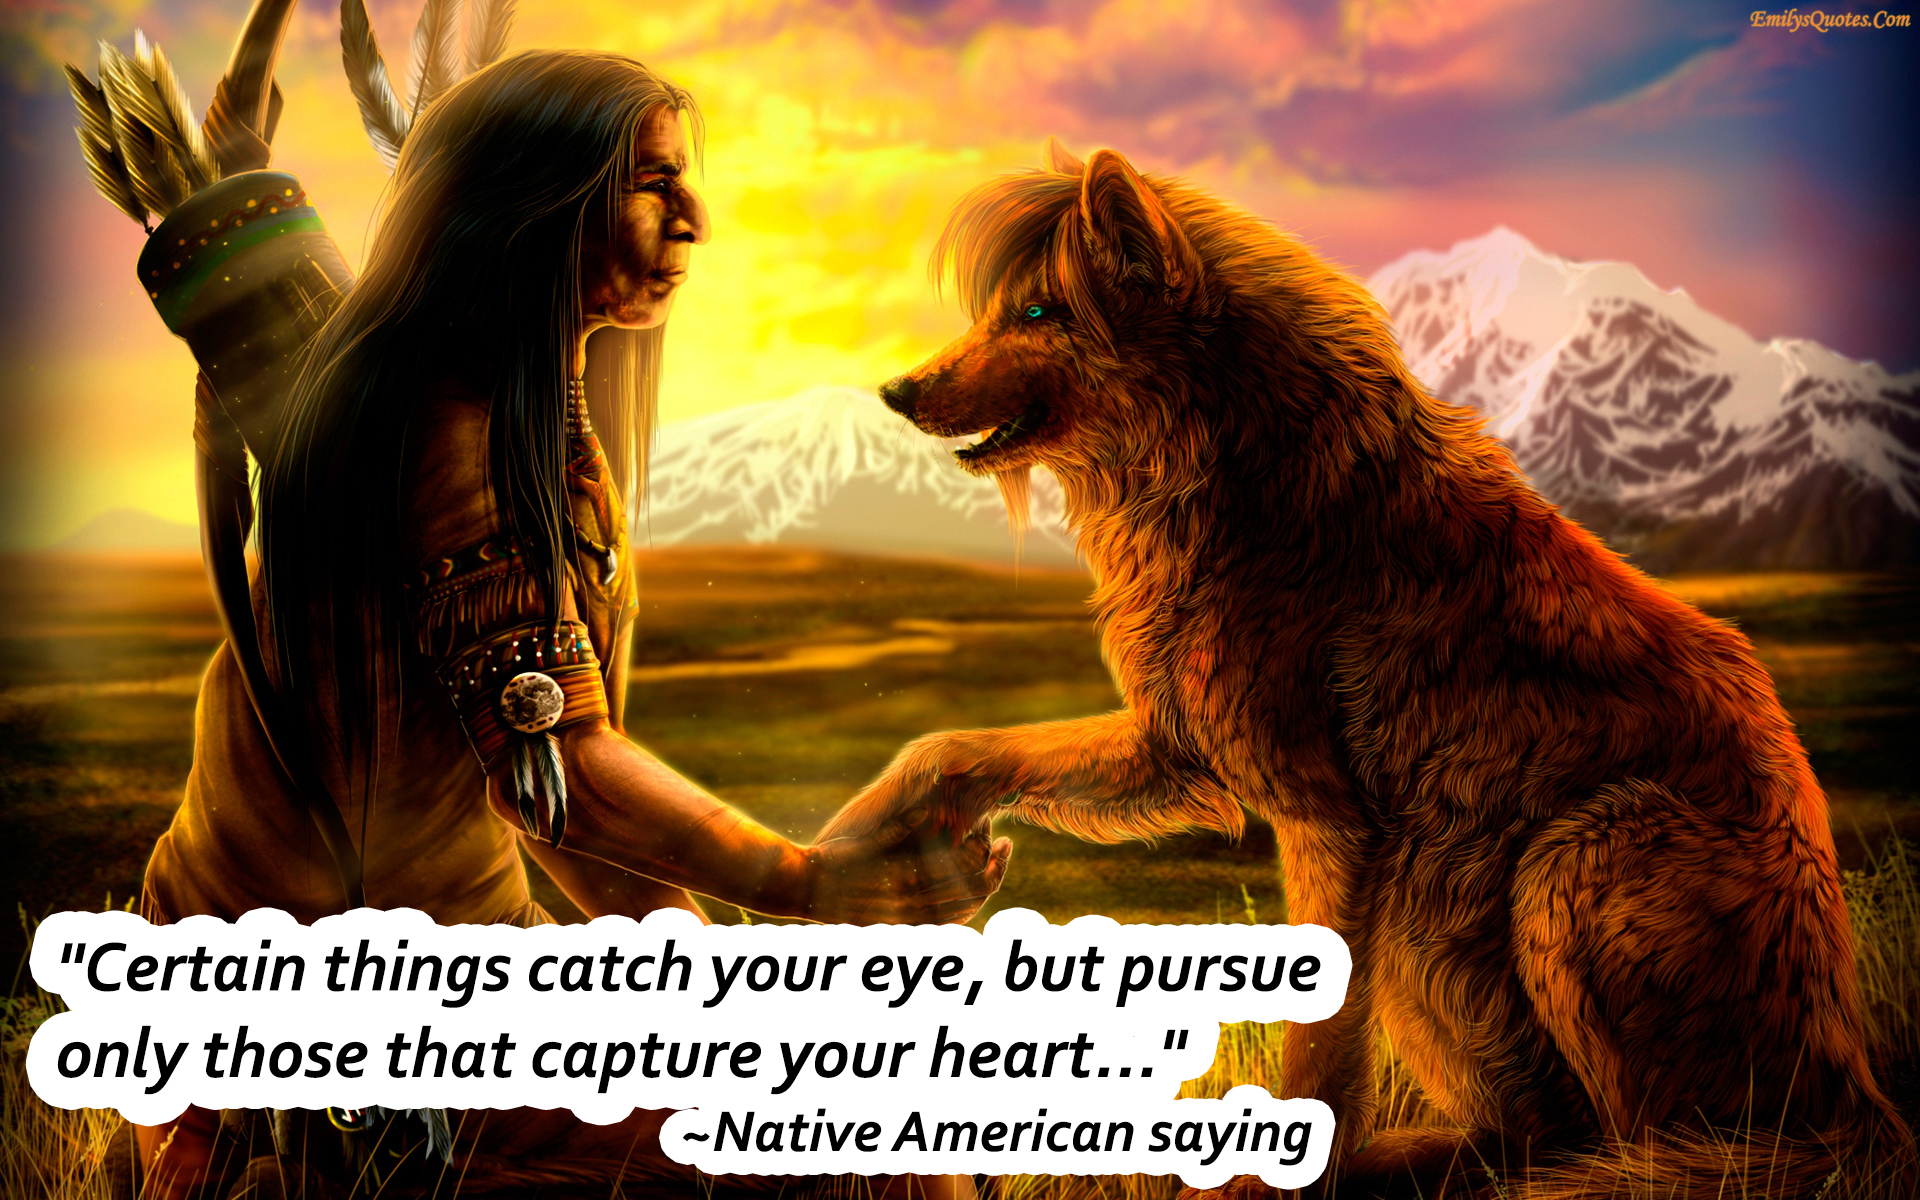 Certain things catch your eye, but pursue only those that capture your heart